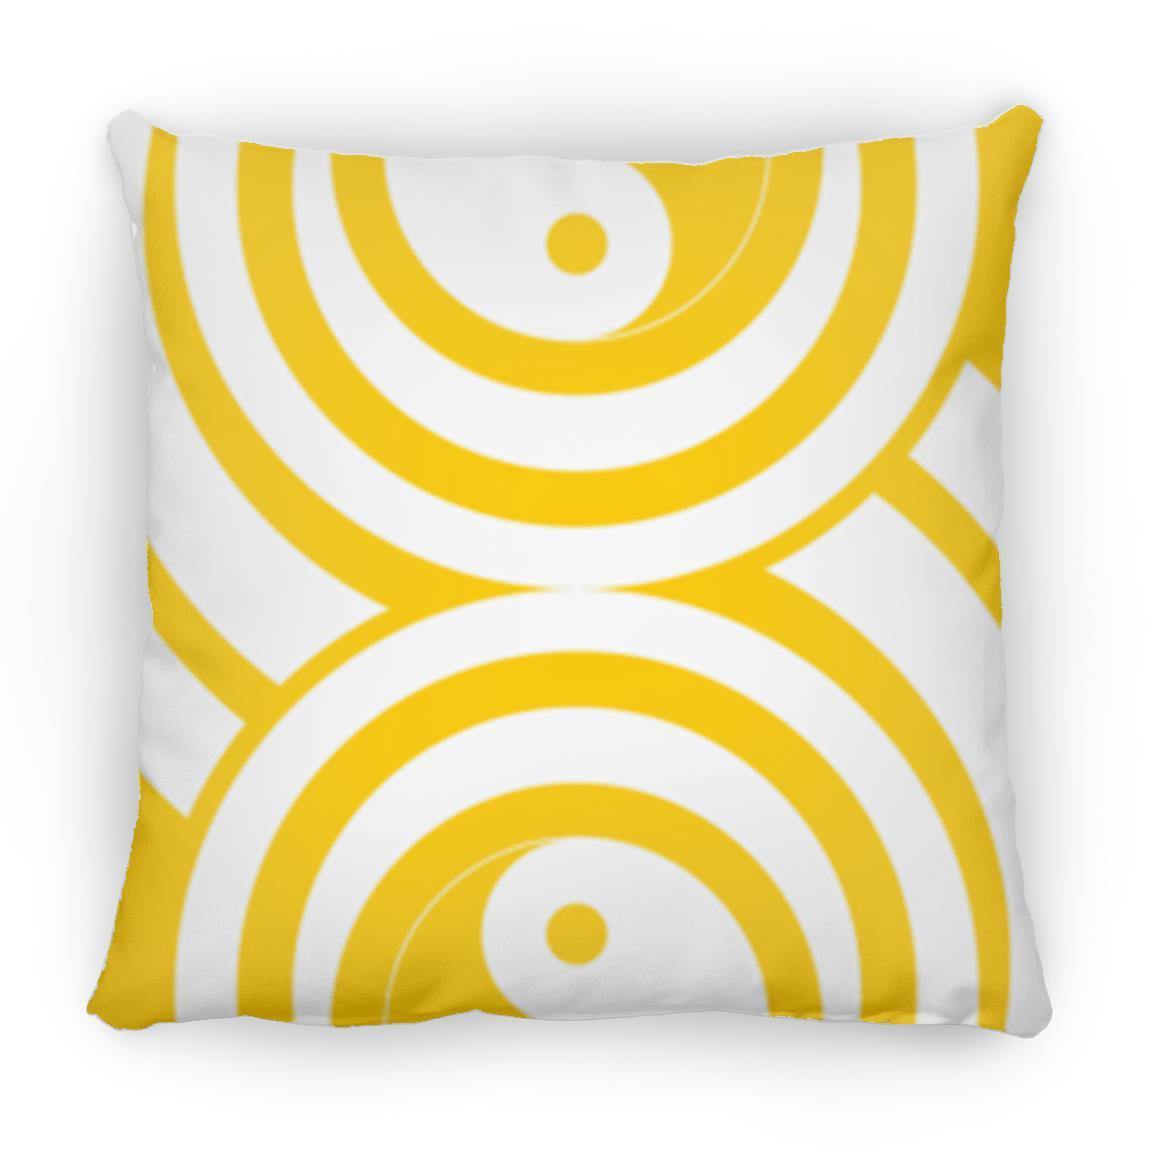 Crop Circle Pillow - West Kennet 2 - Shapes of Wisdom